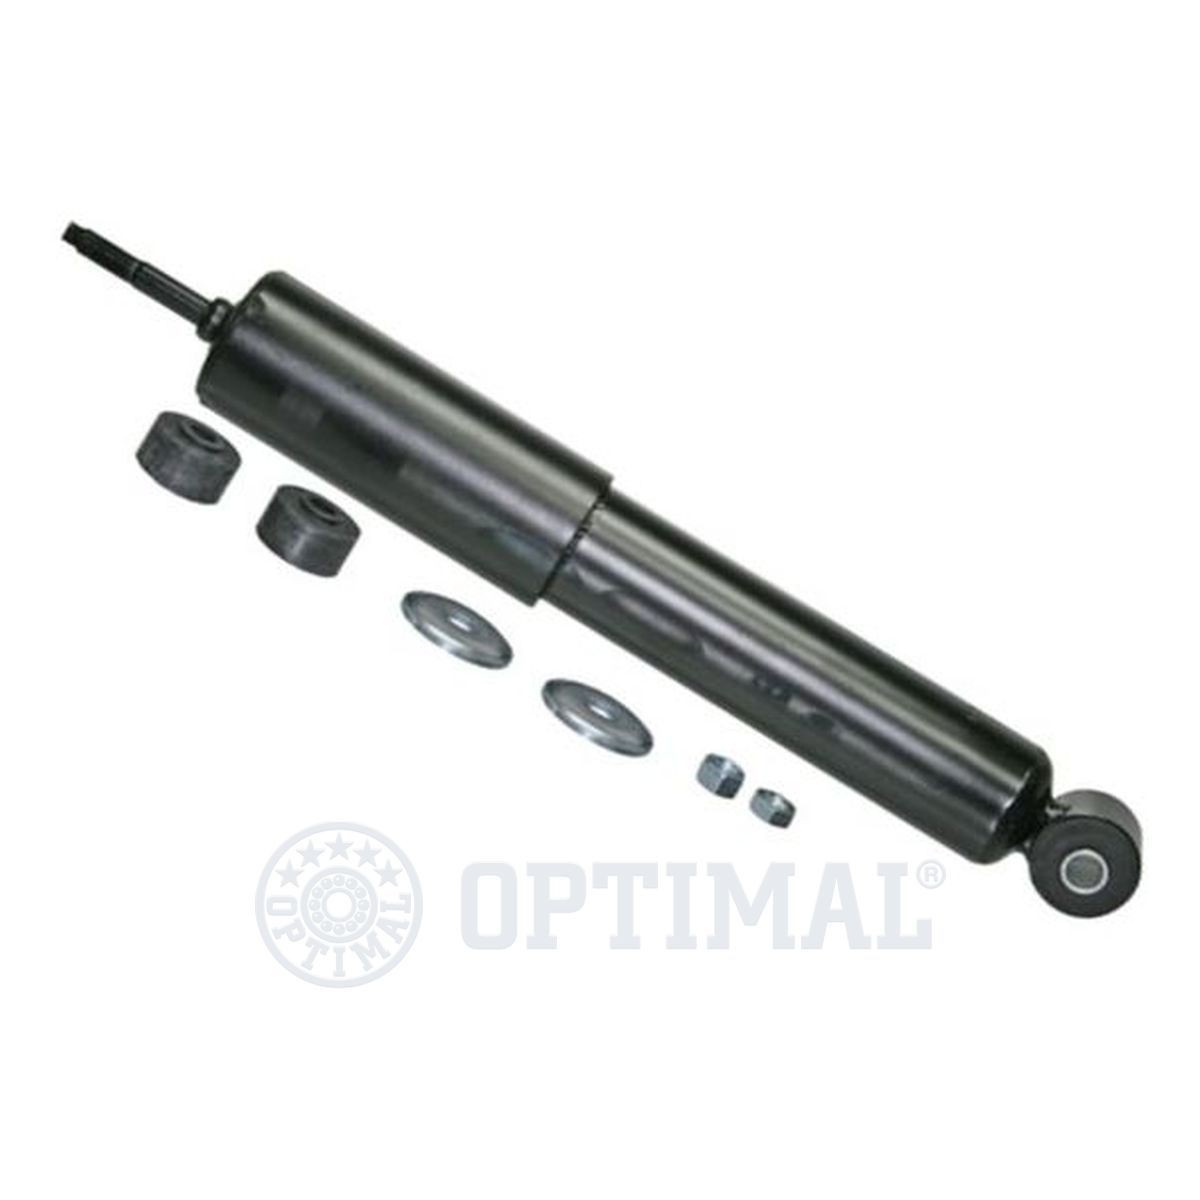 OPTIMAL Front Axle, Gas Pressure, Twin-Tube, Telescopic Shock Absorber, Bottom eye, Top pin Shocks A-1346G buy